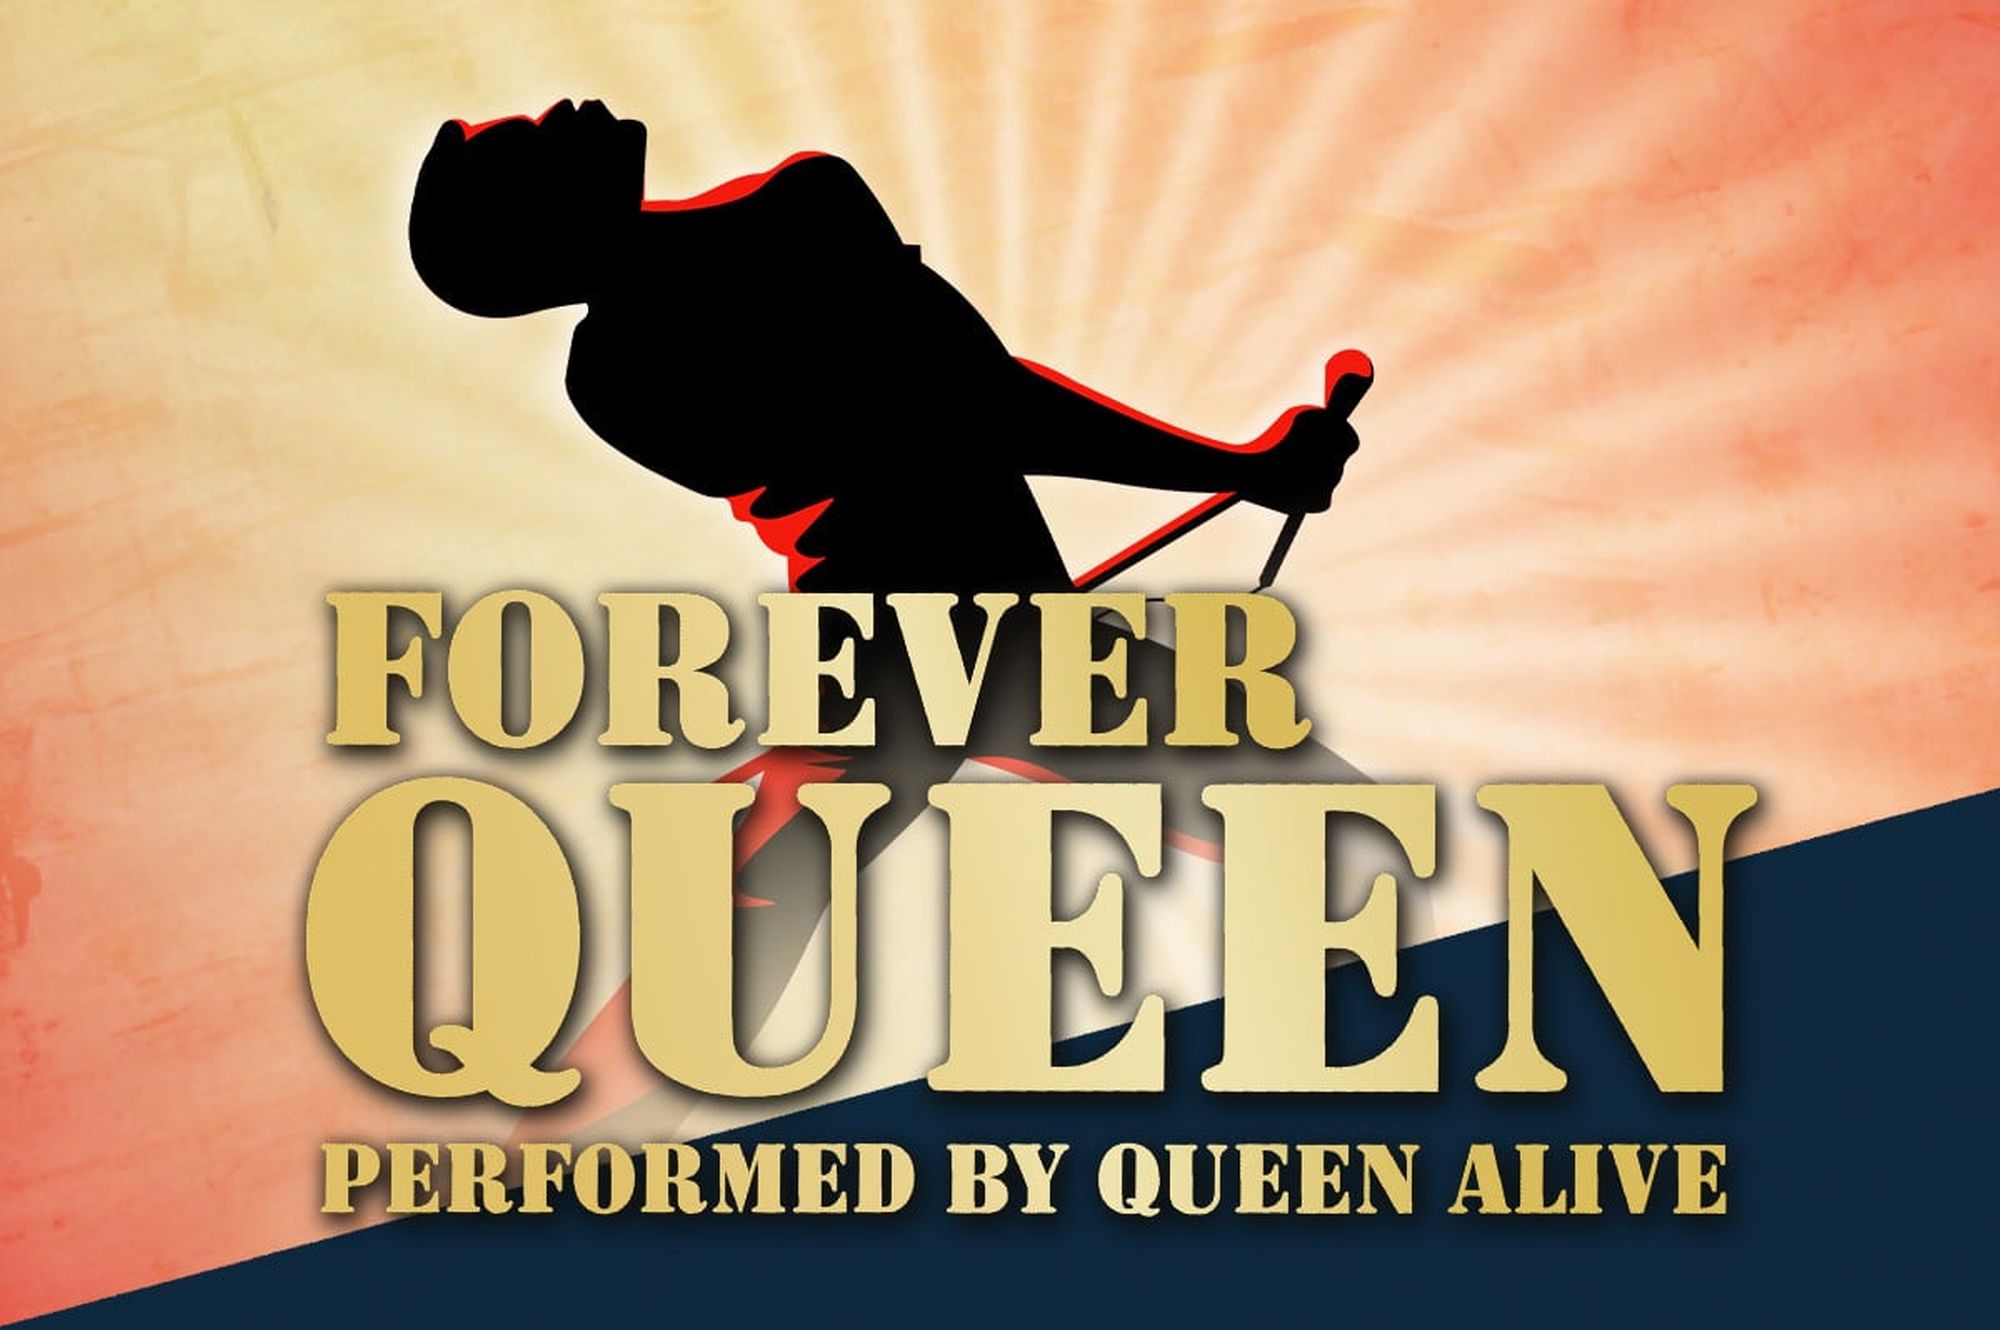 FOREVER QUEEN - performed by Queen Alive